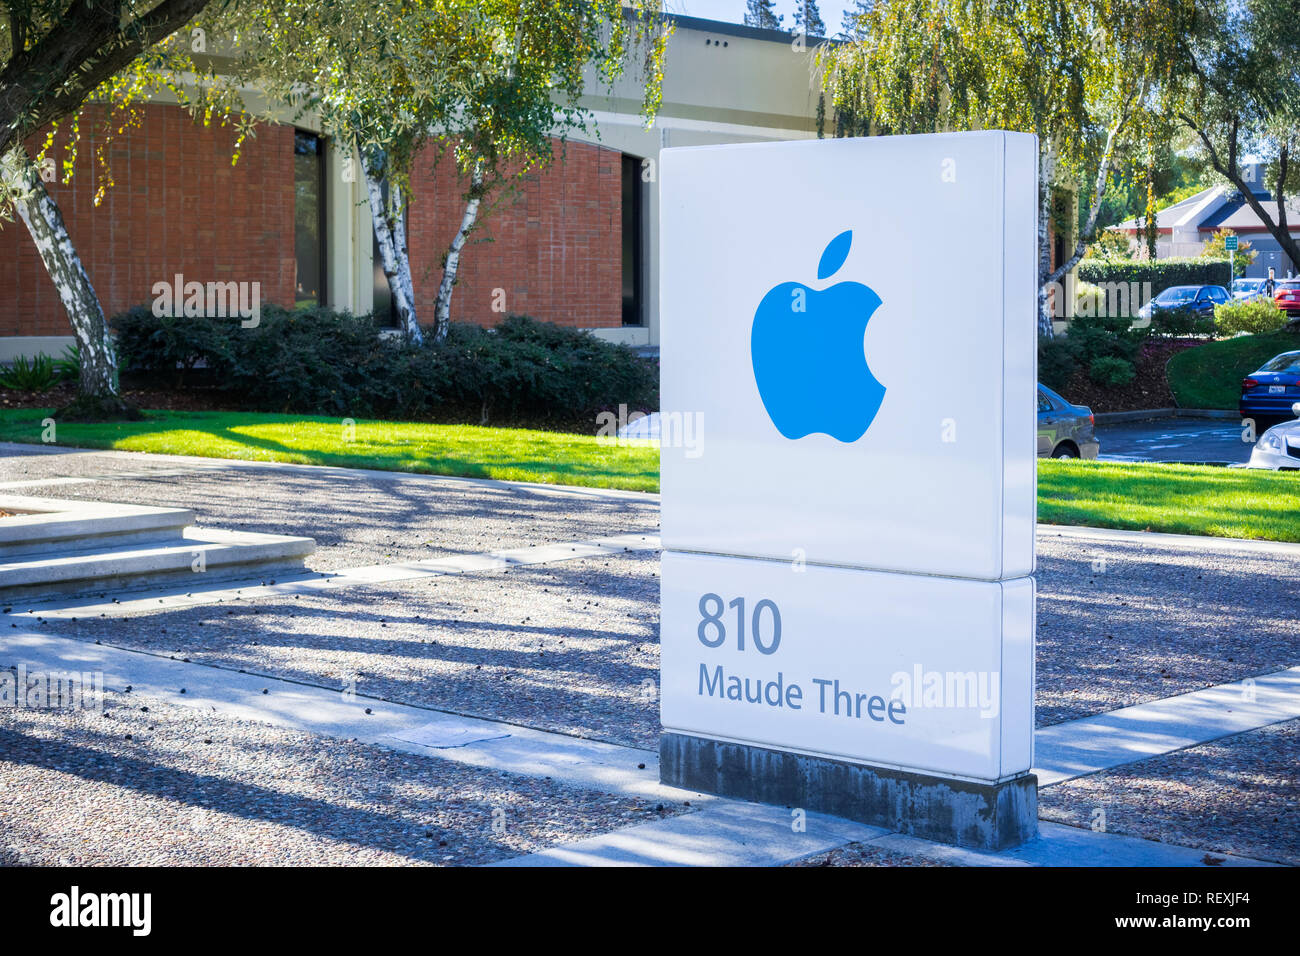 November 17, 2017 Sunnyvale/CA/USA - Apple logo at the entrance of one of the offices in Silicon Valley, San Francisco bay area Stock Photo